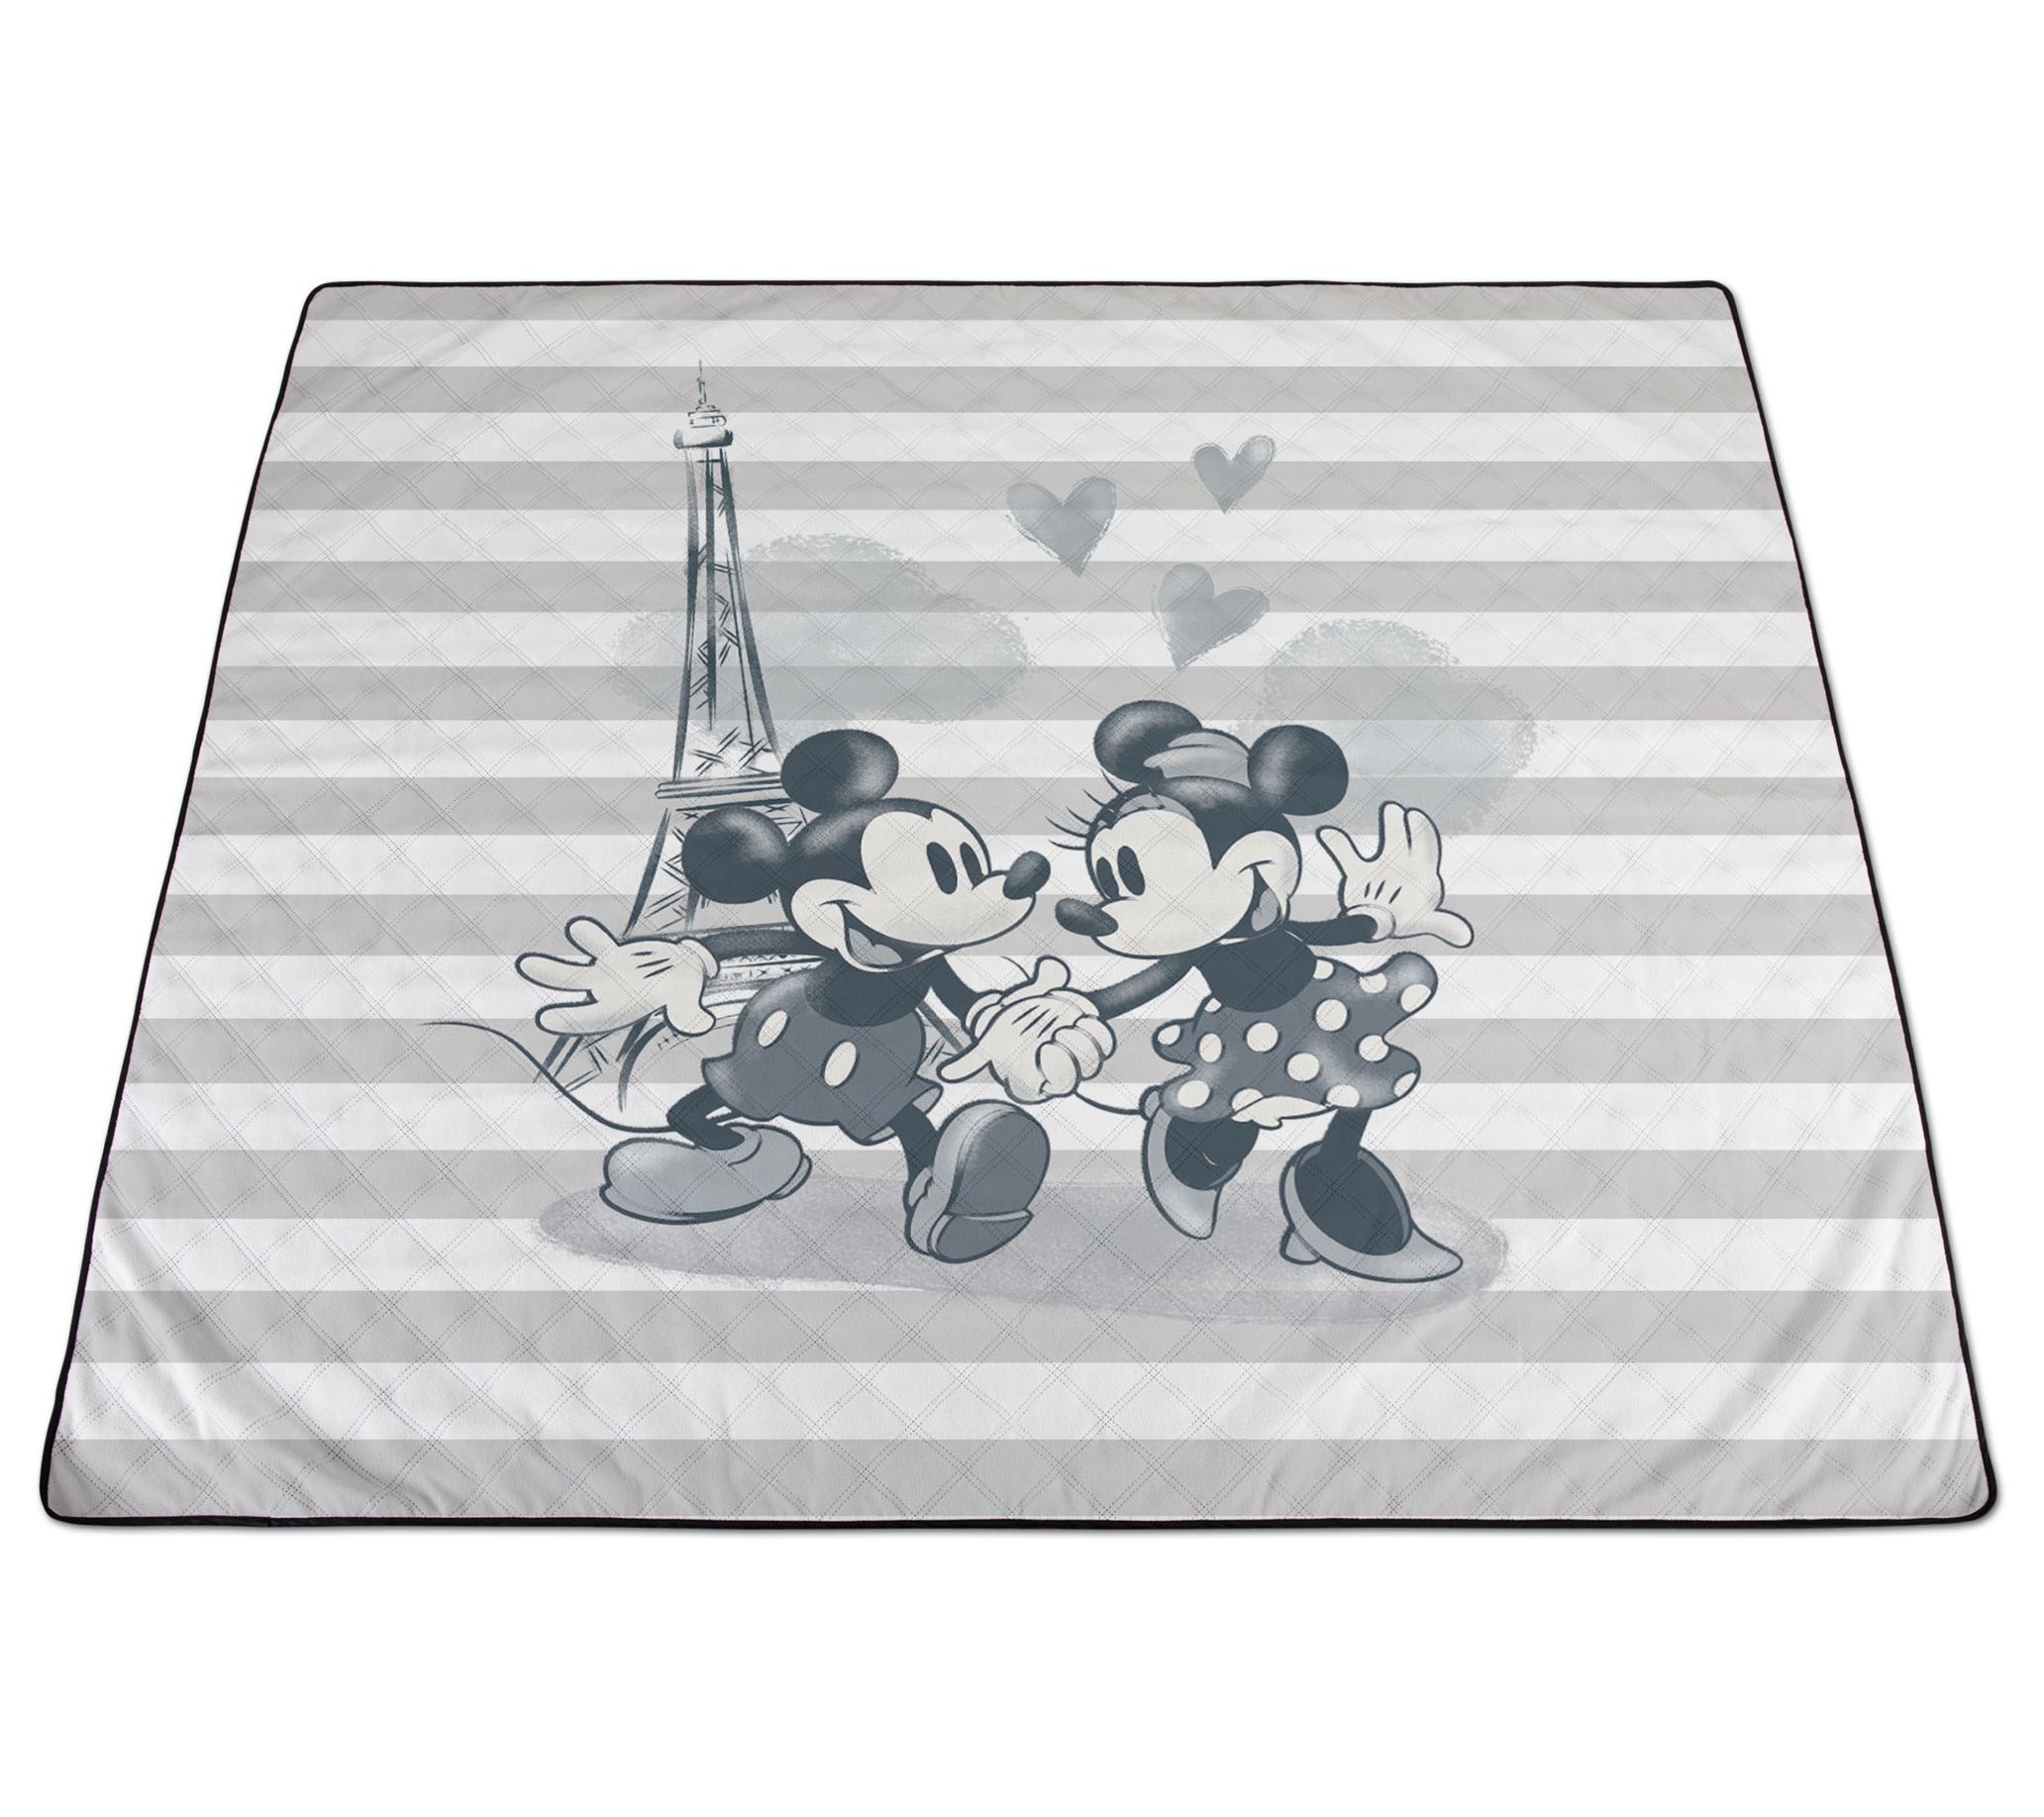 Mickey & Minnie Have A Picnic On This Dooney & Bourke Collection! 